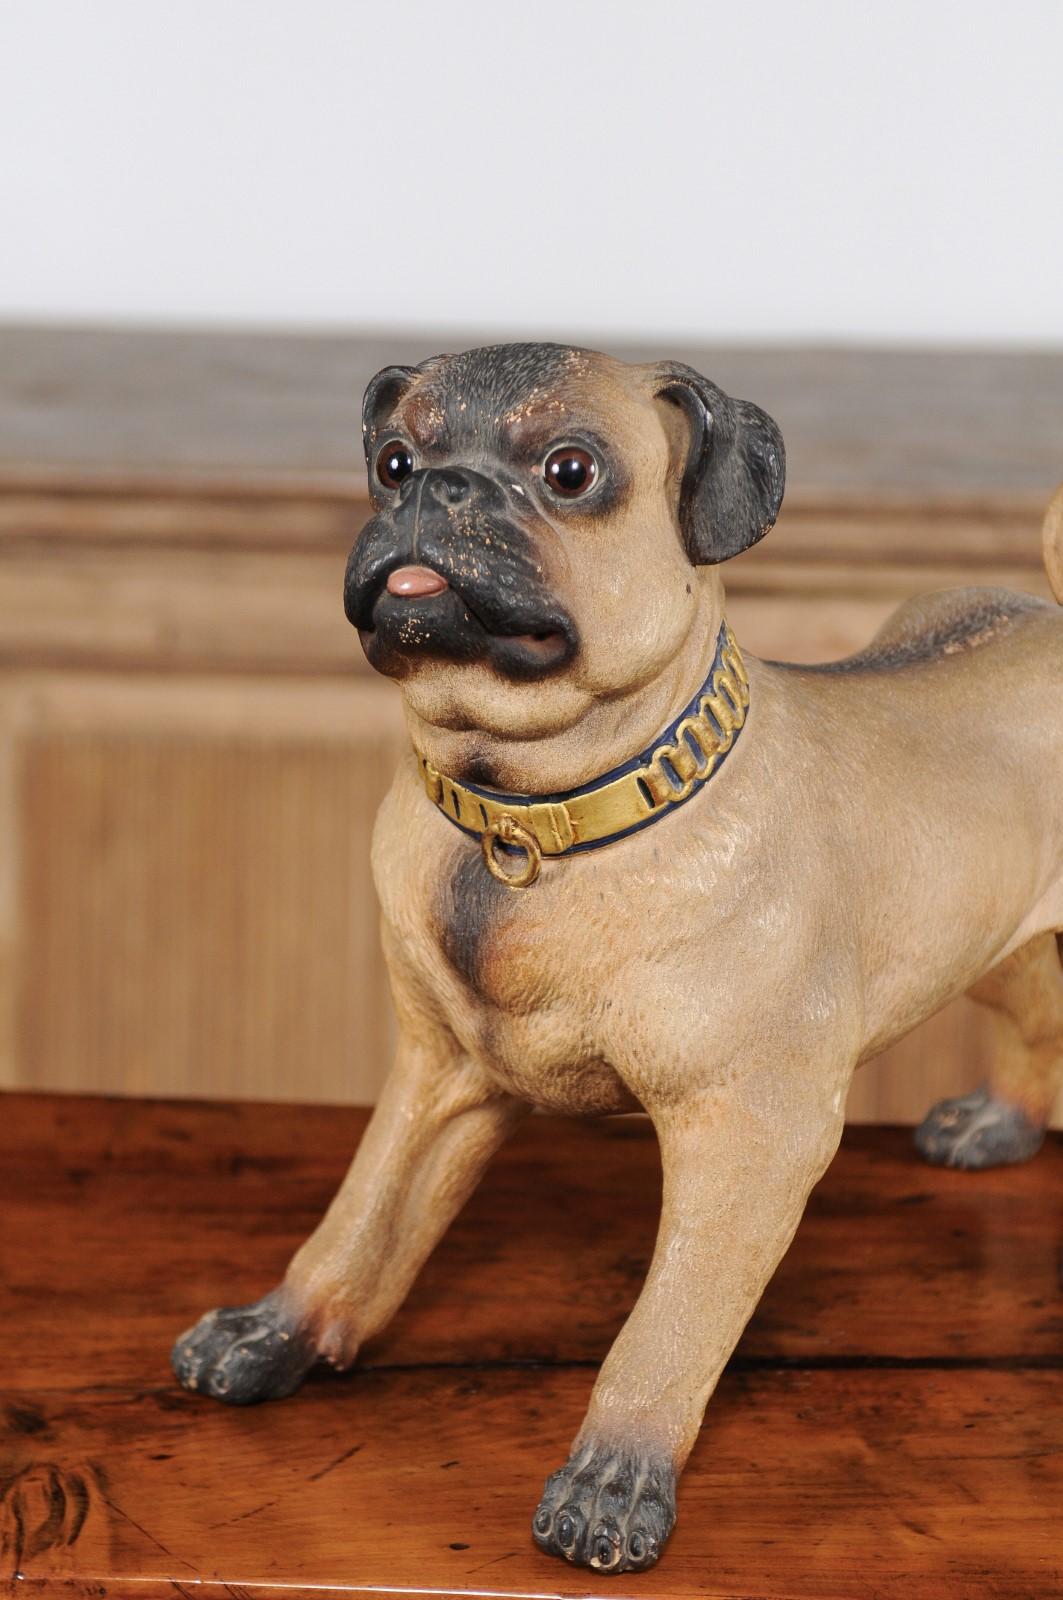 20th Century German Painted Terracotta Pug Sculpture with Playful Attitude and Gilt Collar